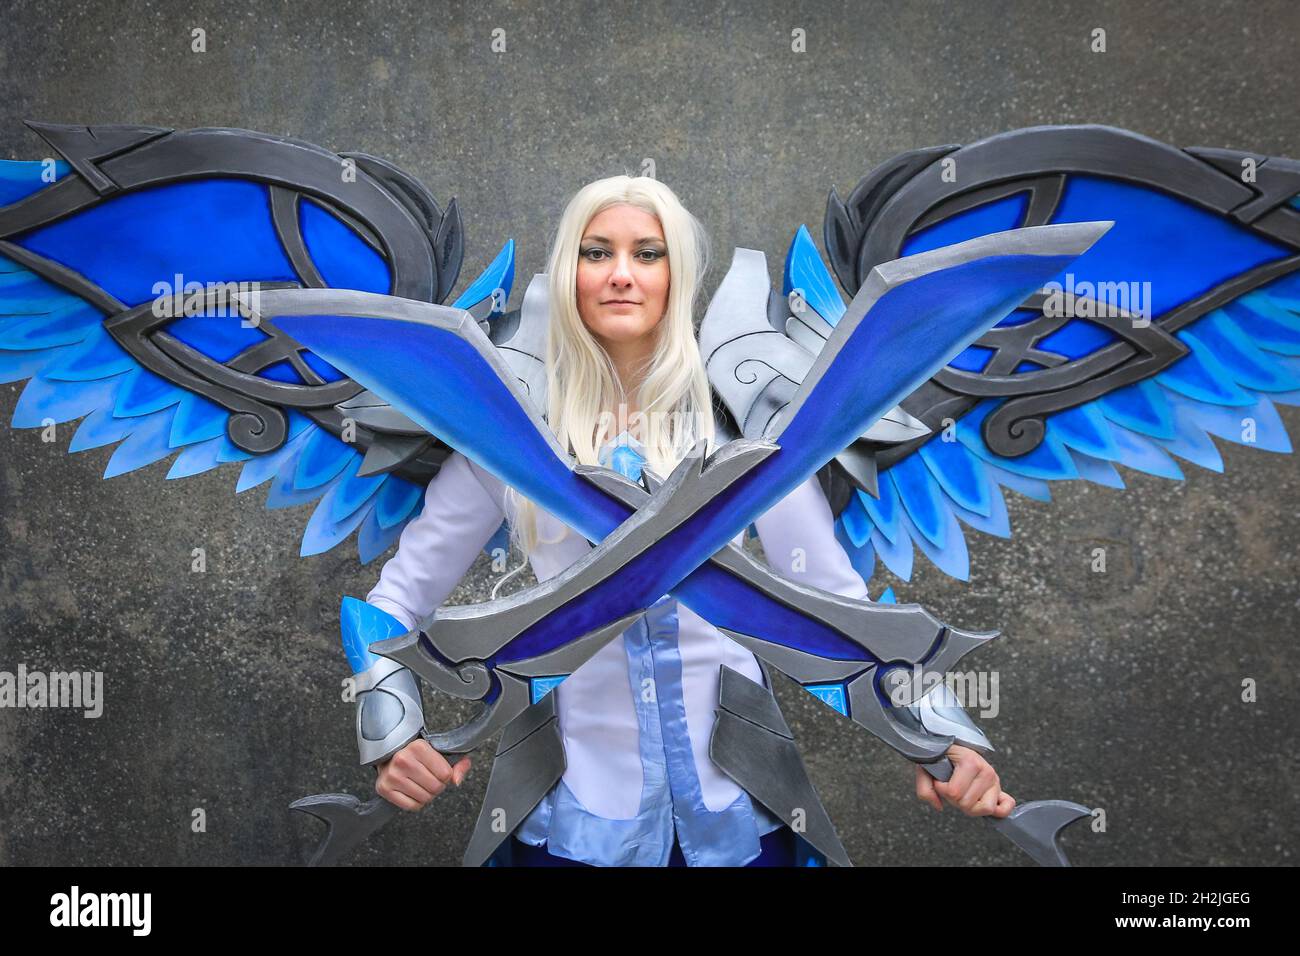 ExCel, London, UK. 22nd Oct, 2021. A cosplayer as Kayle from League of Legends. Cosplayers, fans and visitors once again descend on the ExCel London exhibition centre for MCM Comic Con. MCM London Comic Con returns 22-24 October for a celebration of Pop Culture. Credit: Imageplotter/Alamy Live News Stock Photo